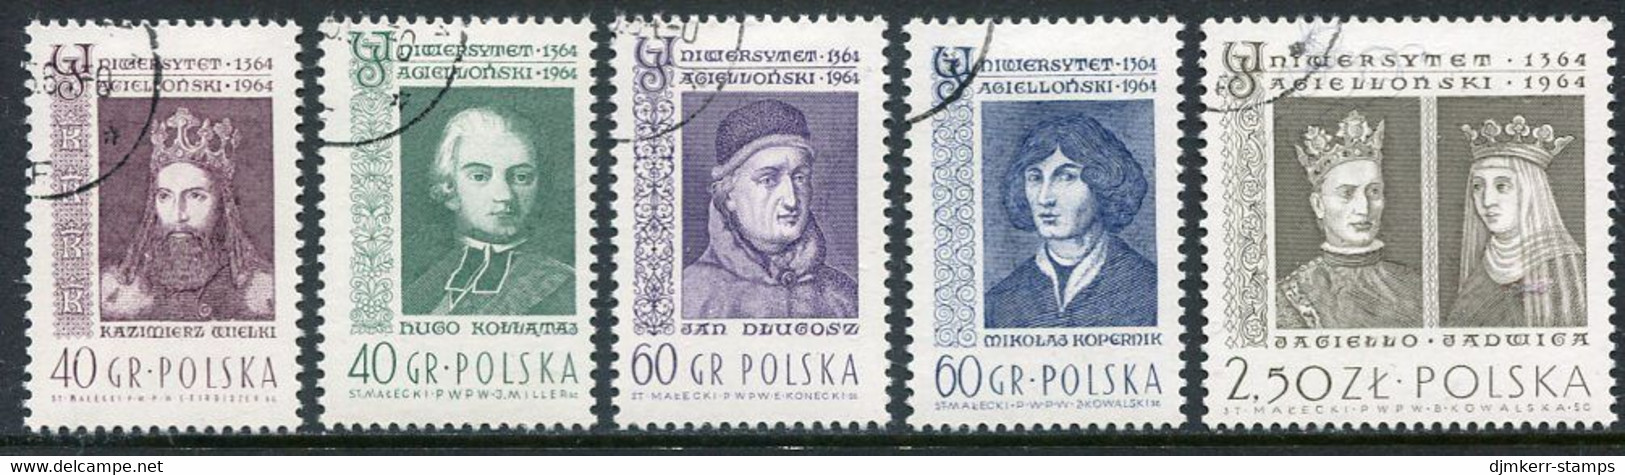 POLAND 1964 Jagellonian University Used.  Michel 1485-89 - Used Stamps